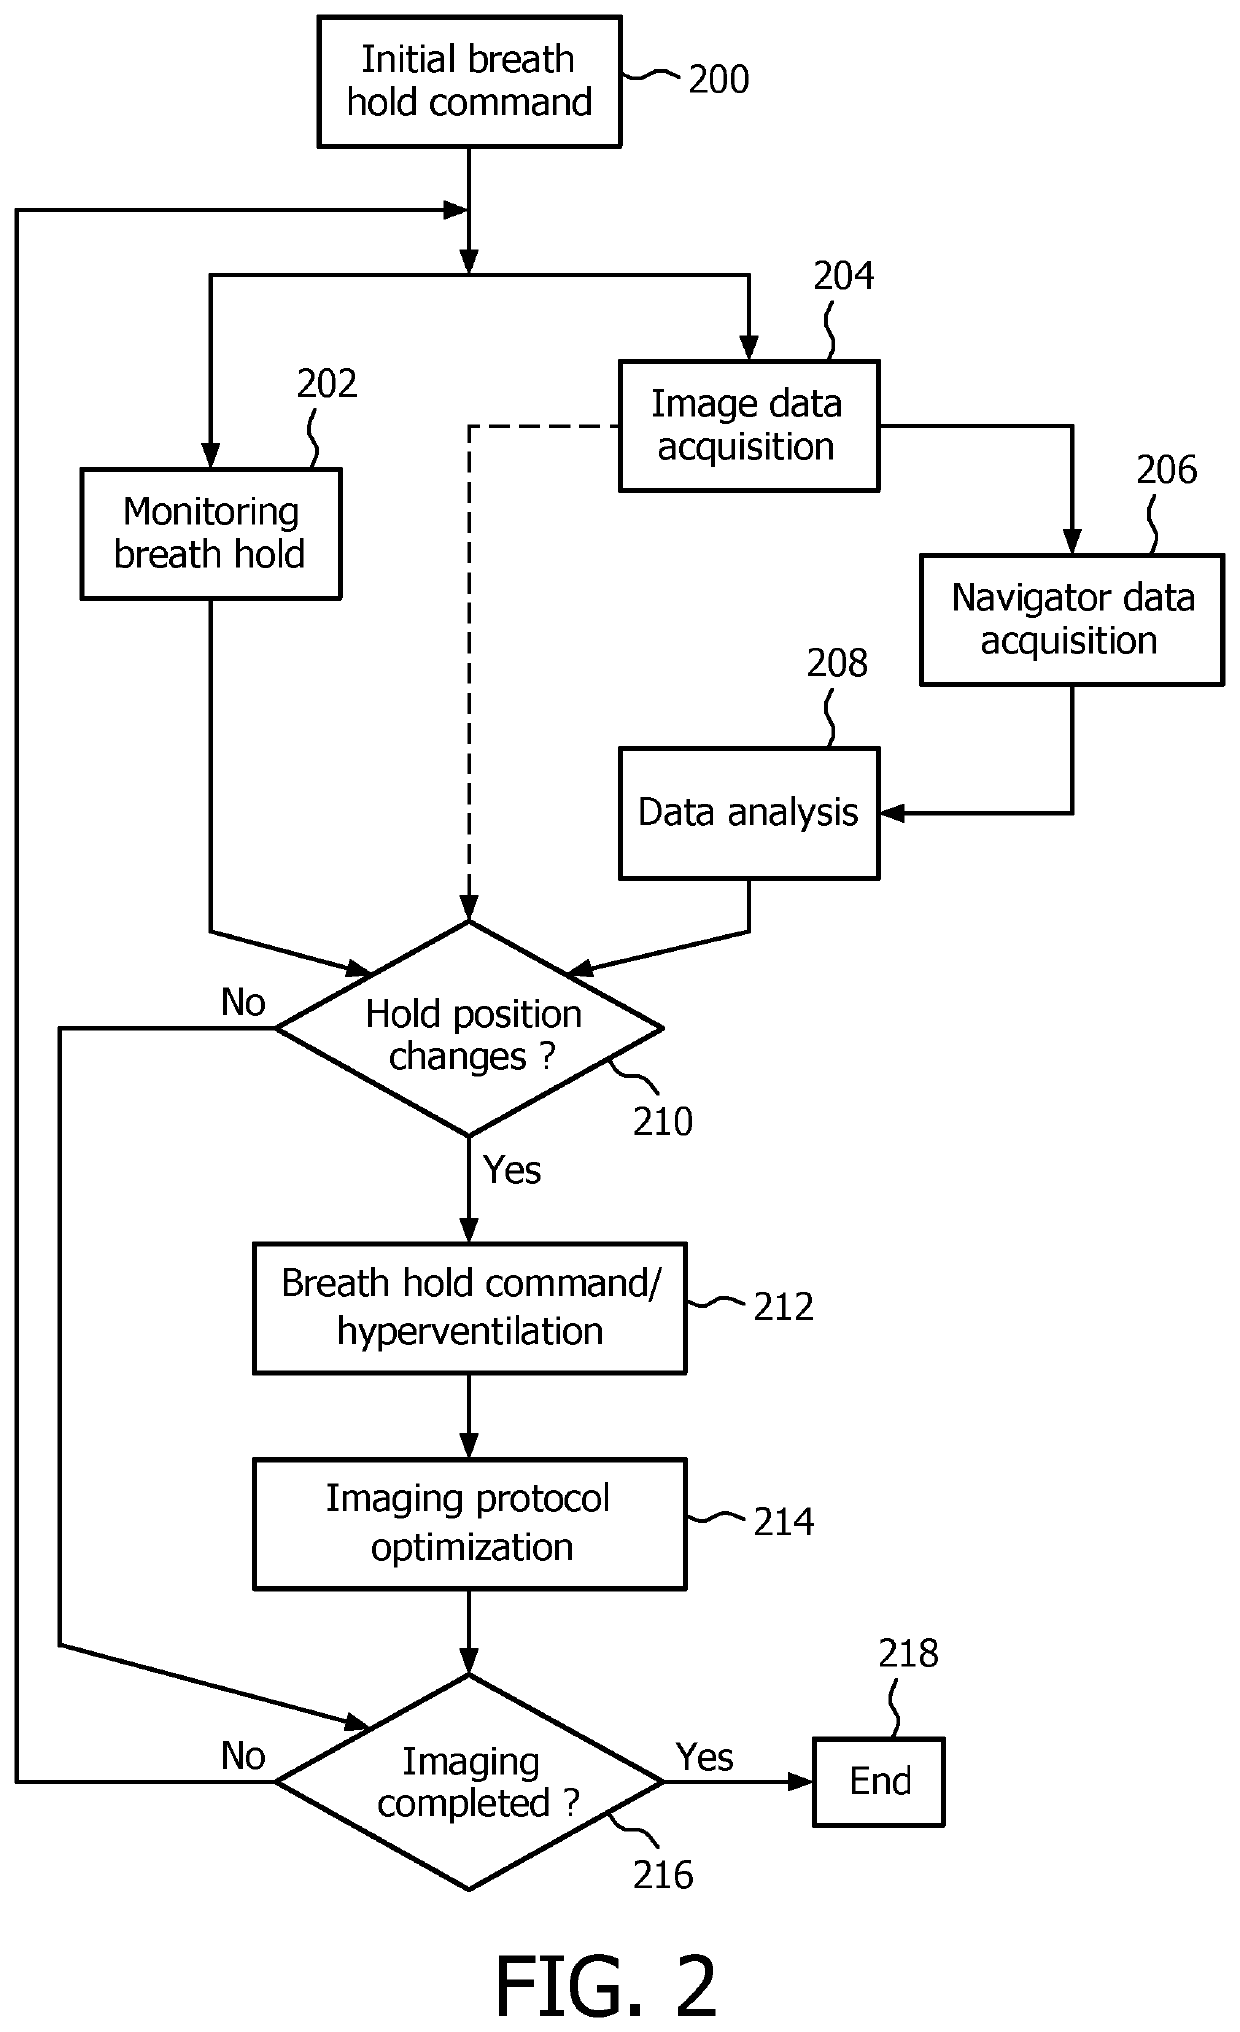 MR data acquisition using physiological monitoring